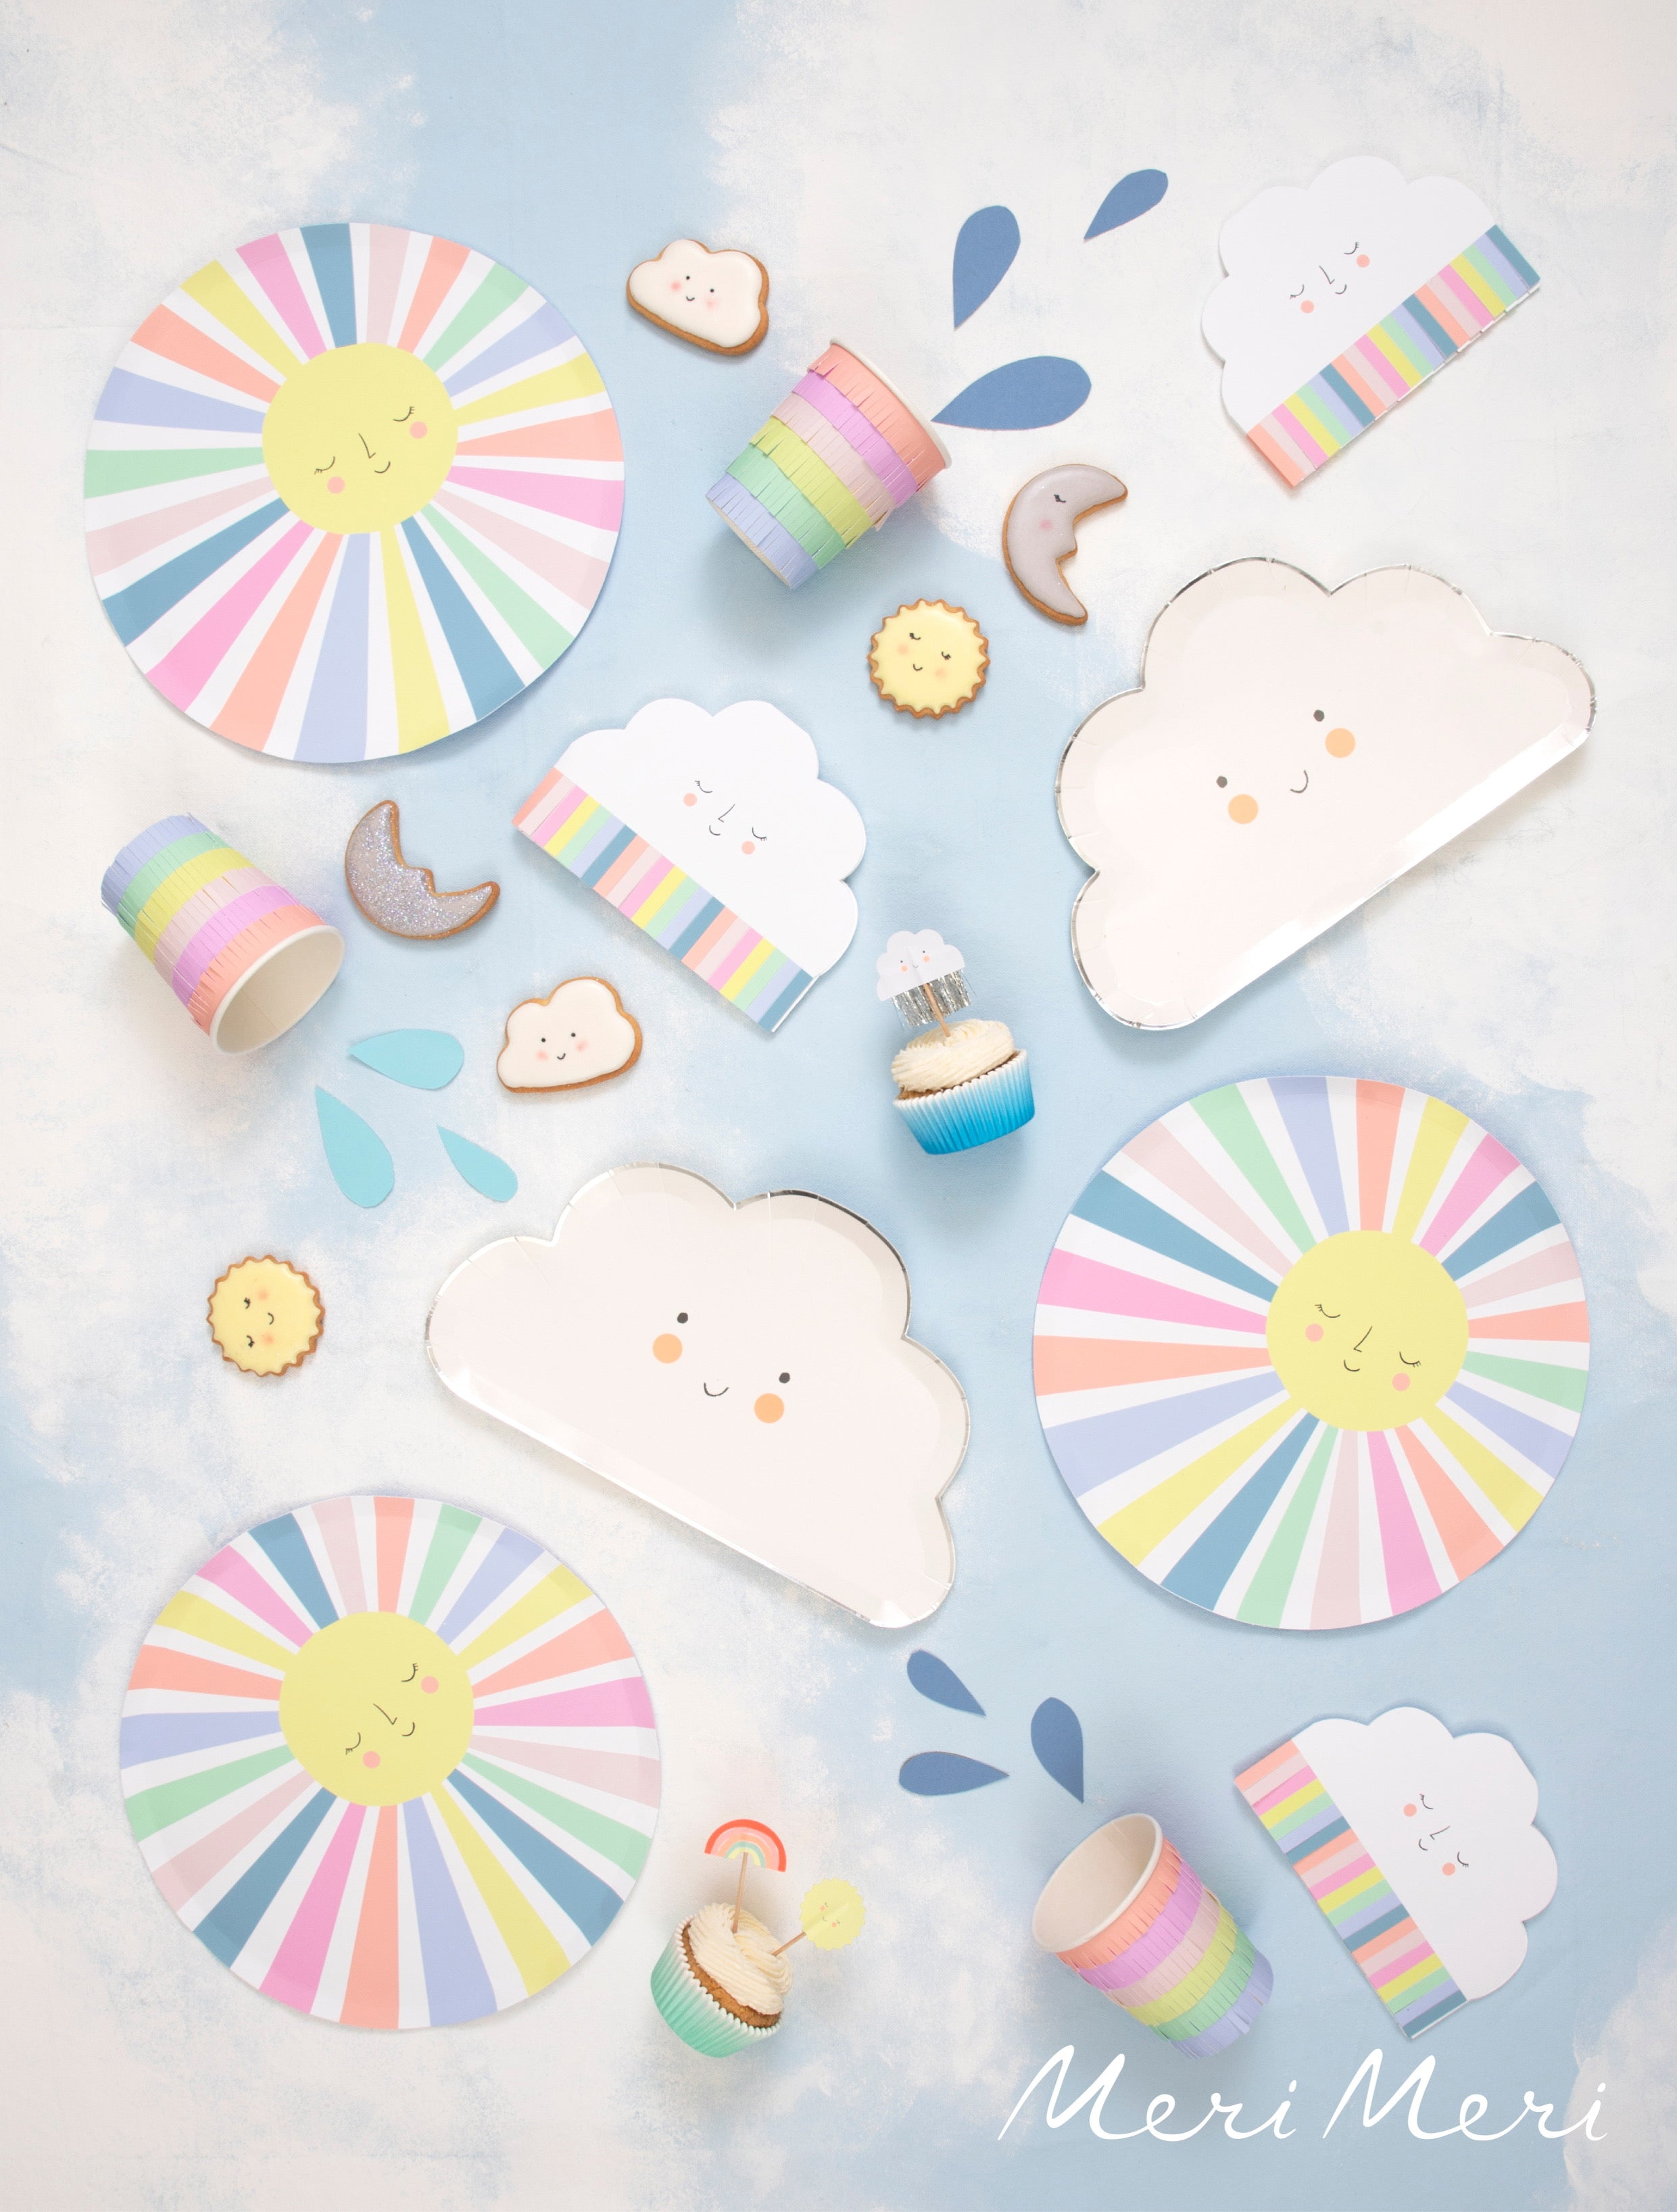 Add a happy smile to your table with  these sun plates or rainbow plates and napkins.